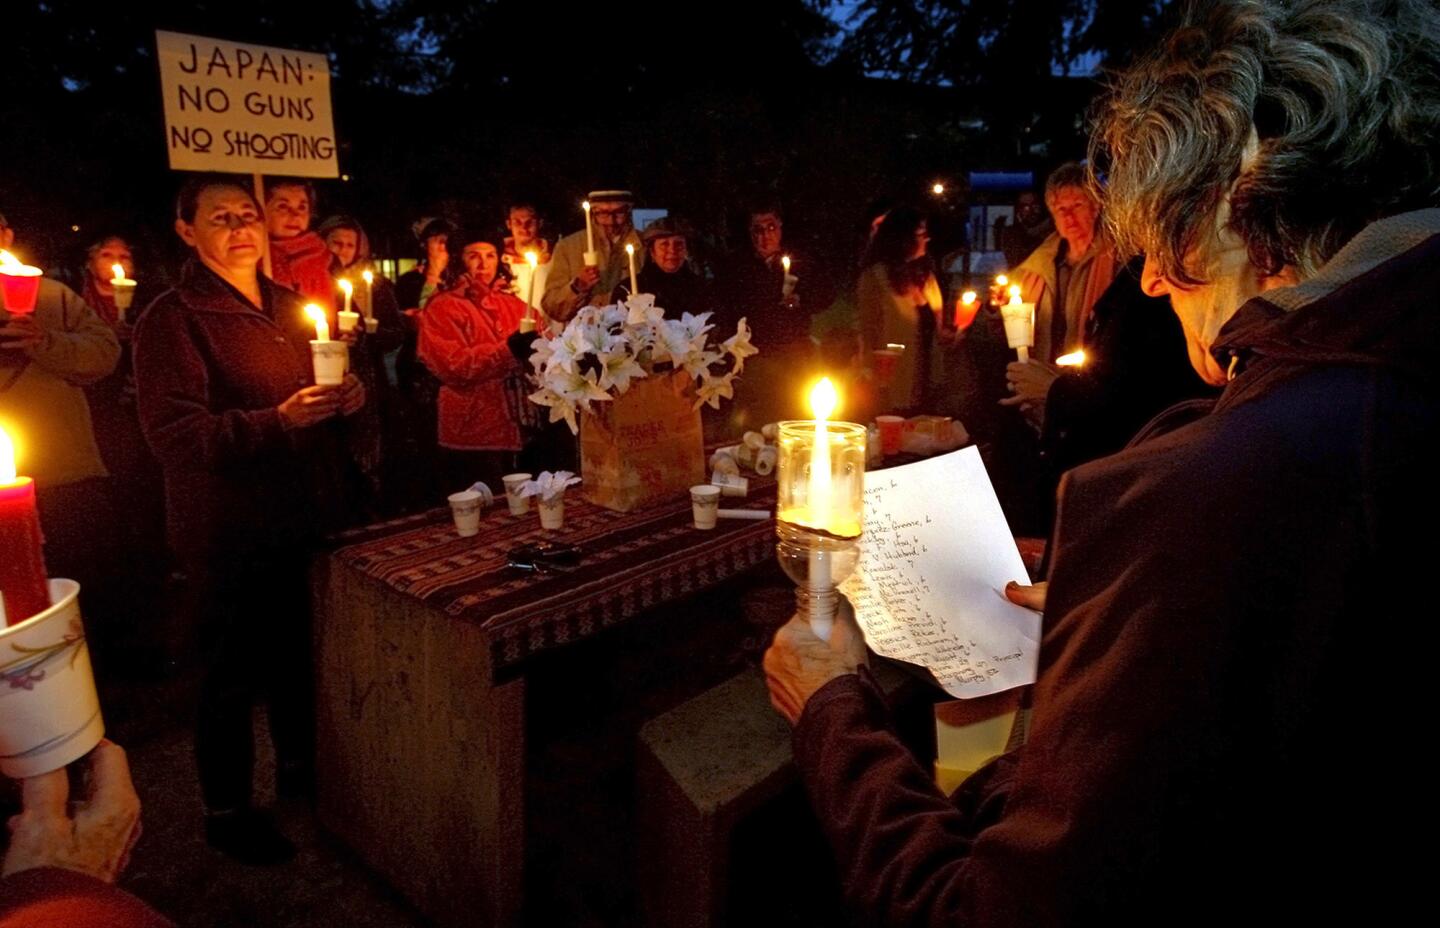 Abby Cohen of Altadena, right, read off the names of those killed at Newtown's (Connecticut) Sandy Hook Elementary School during candlelight vigil at Glenoaks Park in Glendale on Saturday evening, December 15, 2012. About 60 people came to the vigil.